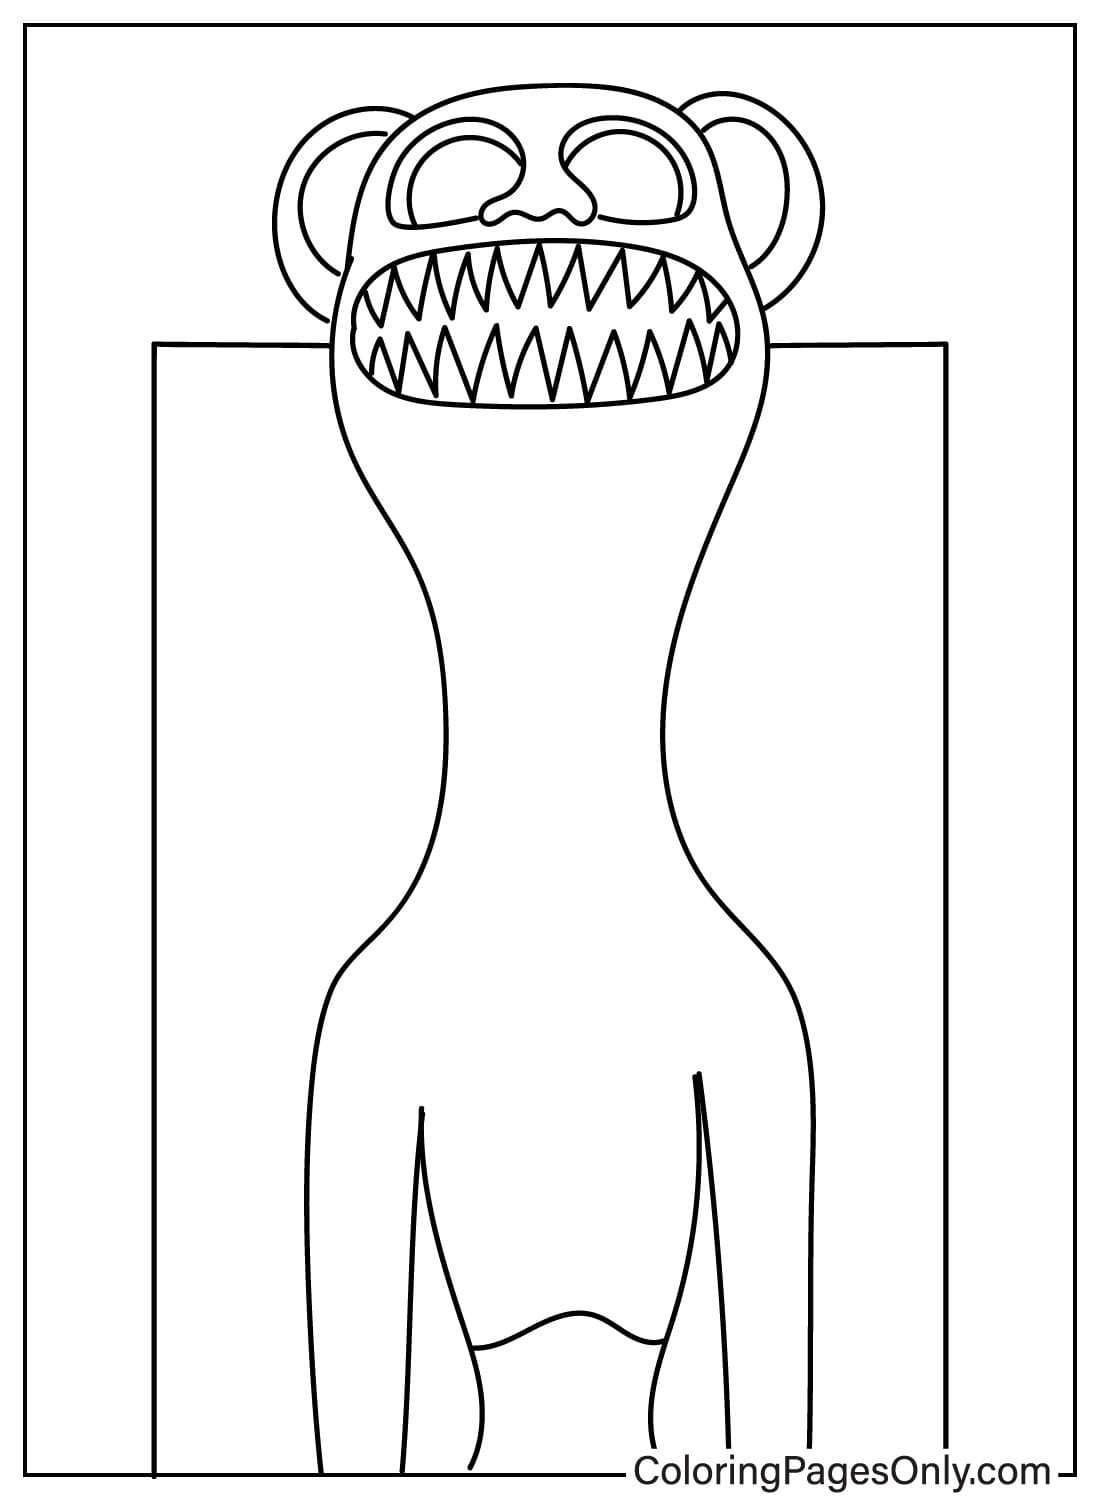 Zoonomaly Coloring Page for Preschoolers from Zoonomaly